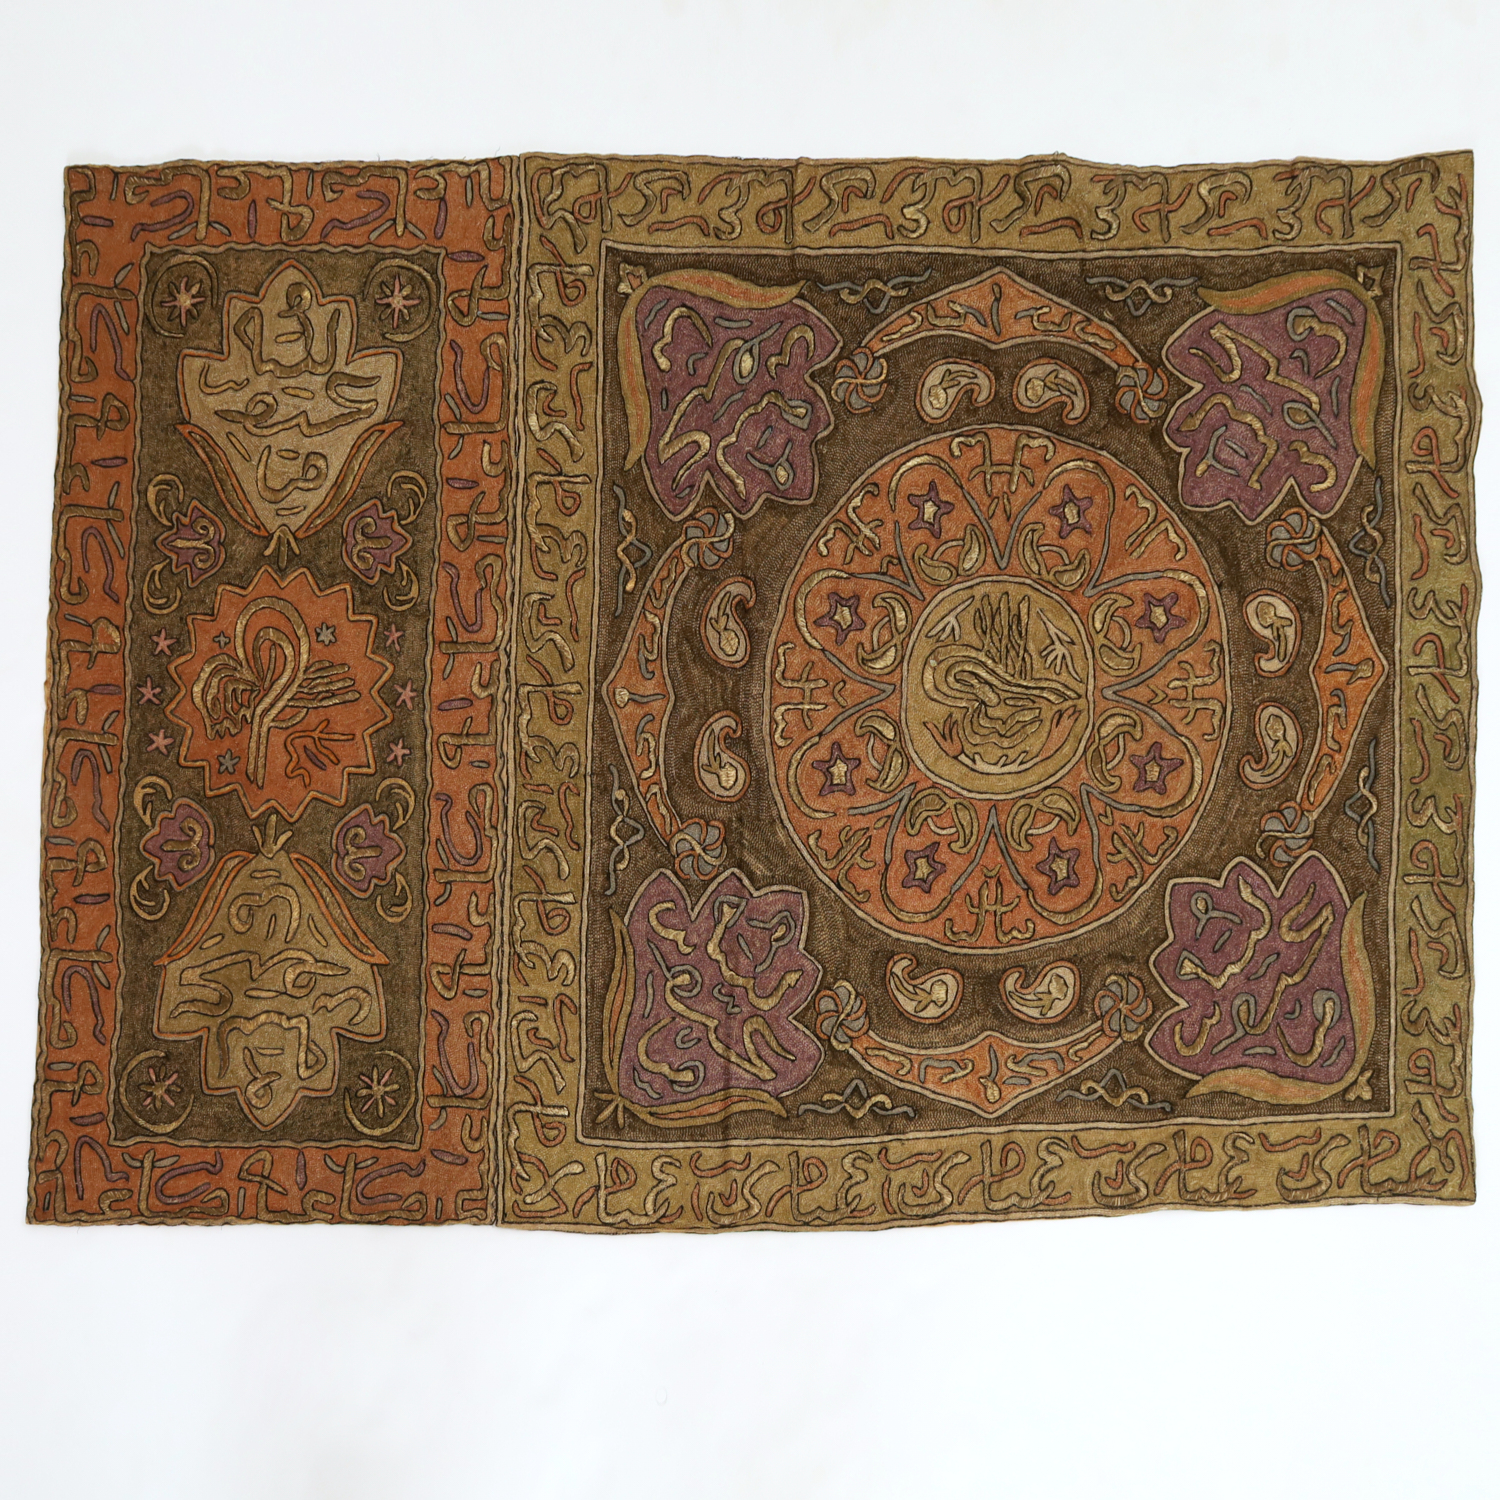 EMBROIDERED ISLAMIC TAPESTRY, EX-MUSEUM